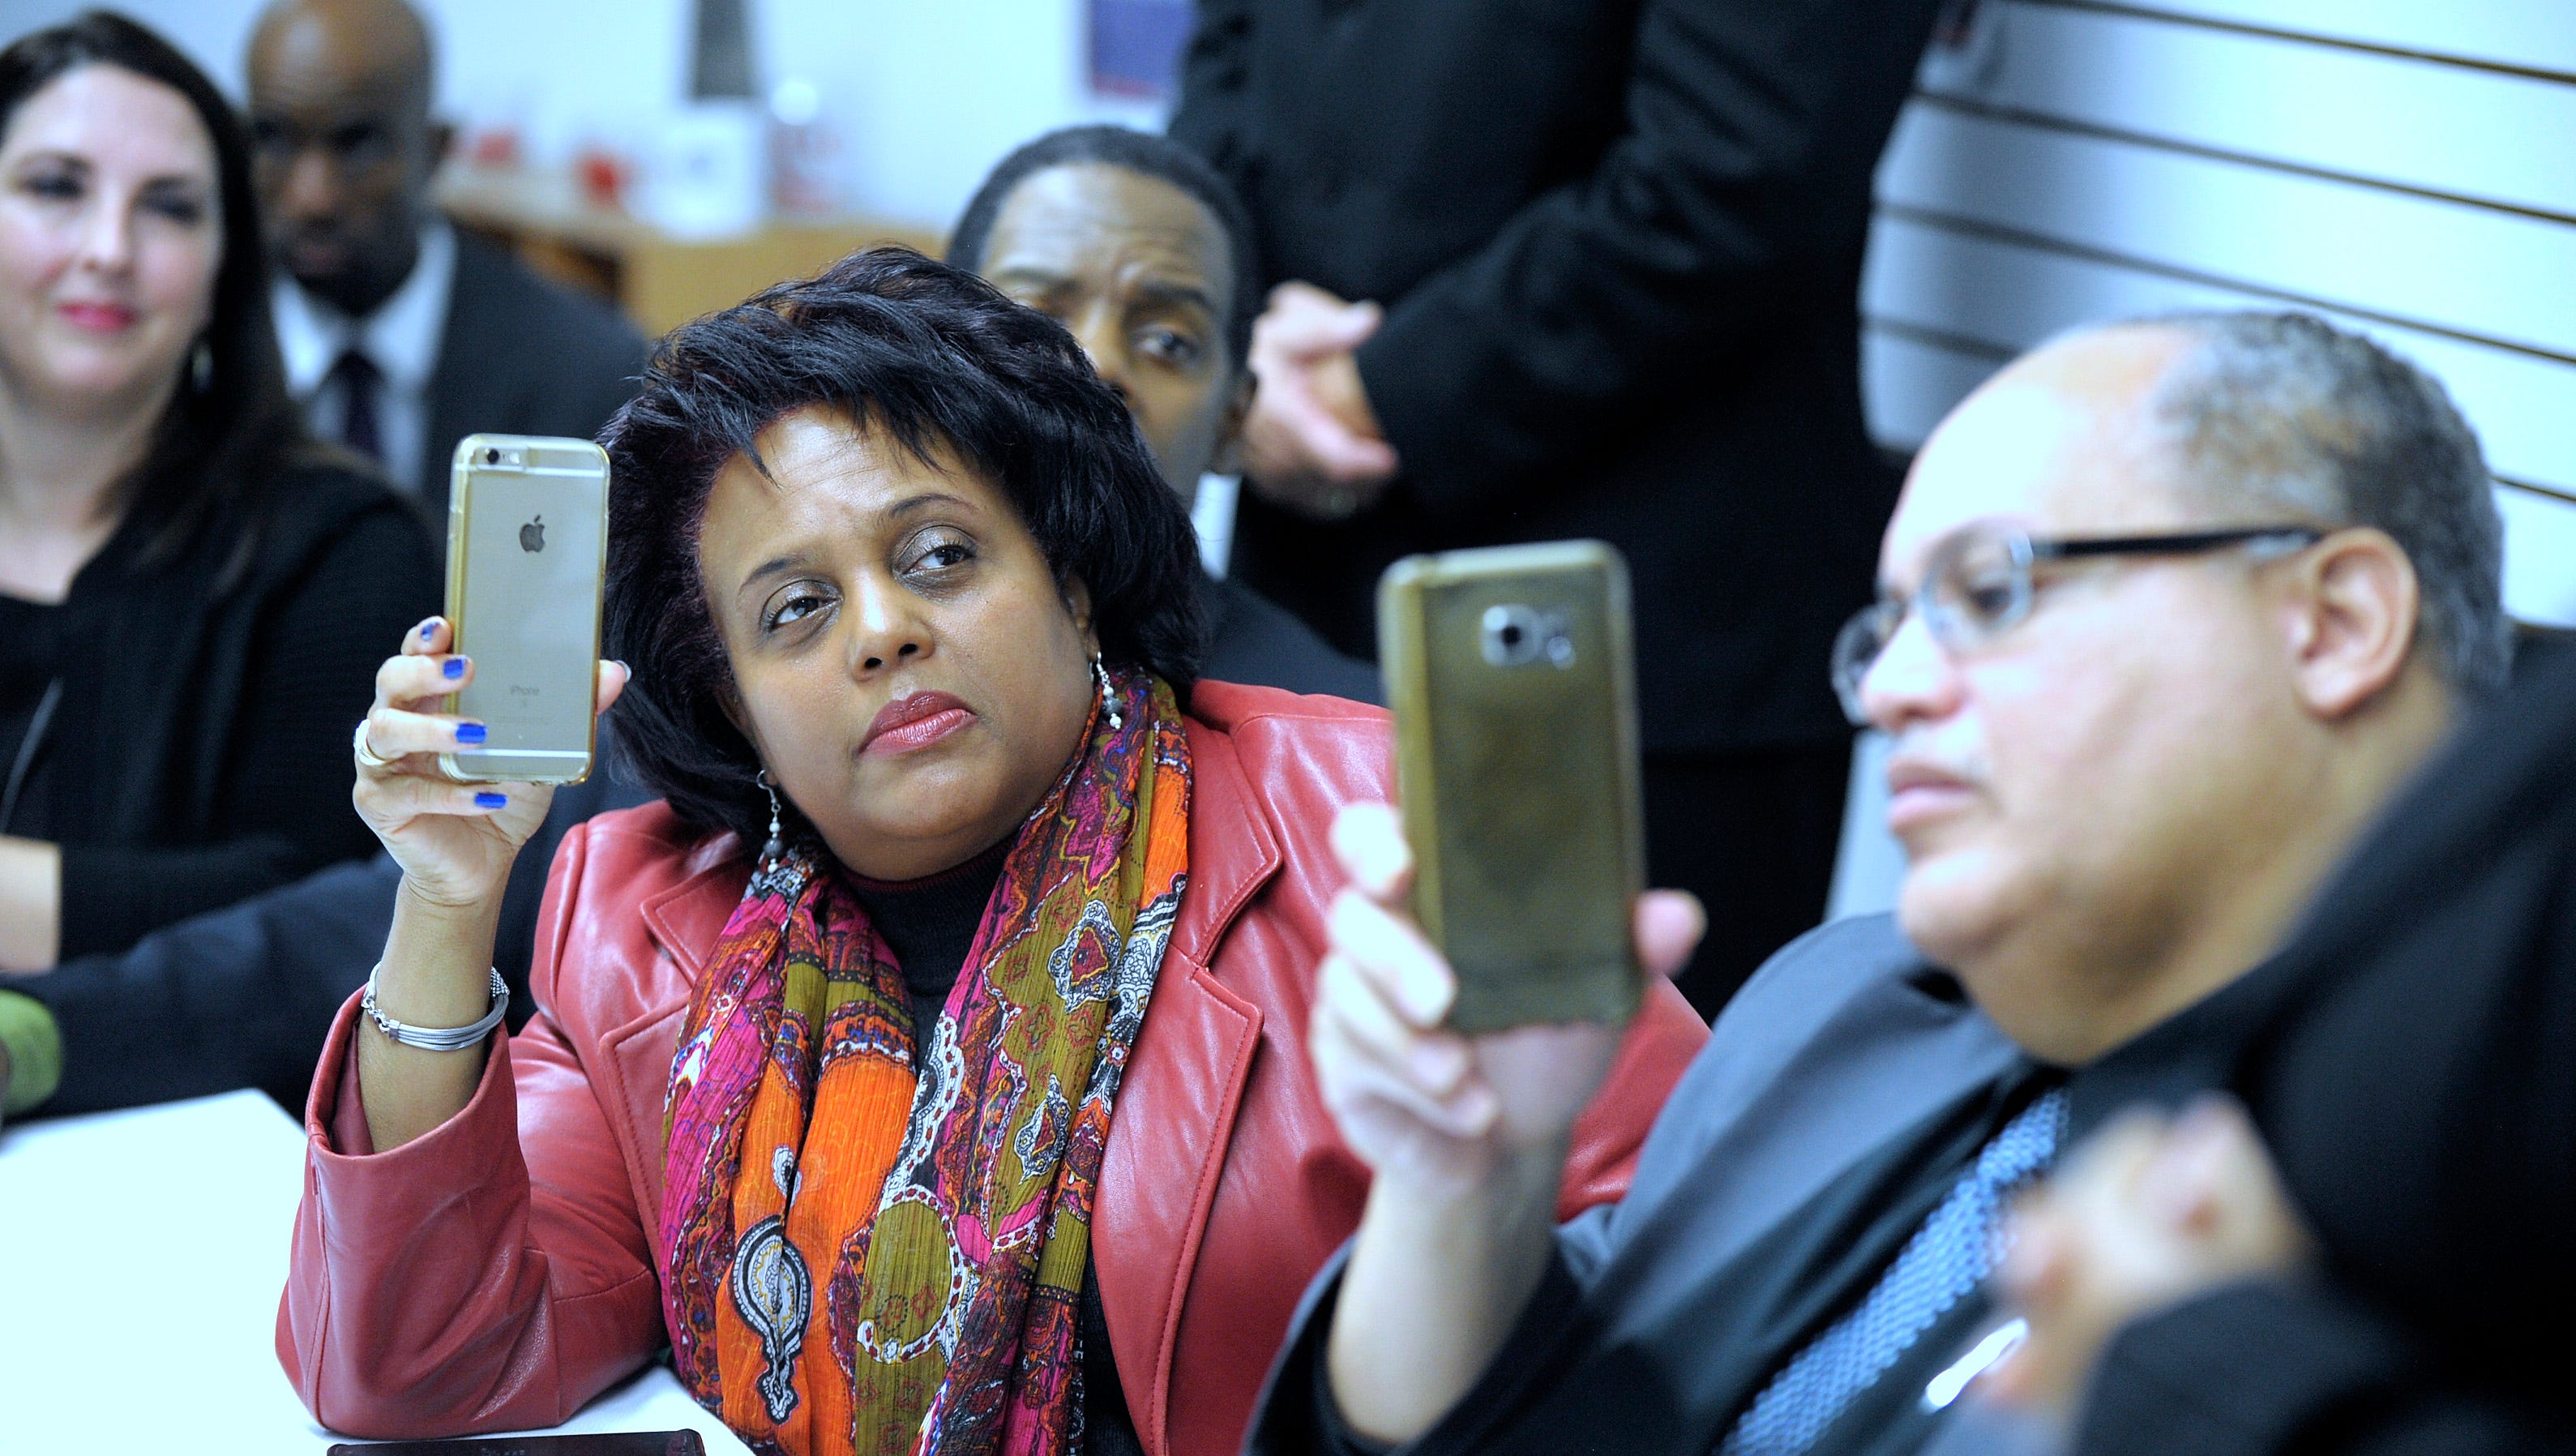 Denise Edwards, left, of Royal Oak, chief administrator for the Edwards Notebook Radio Commentary, and Apostle Keith Barr, right, of Auburn Hills, take pictures with their cellphones. Barr is pastor of the Family Worship Center in Rochester Hills.